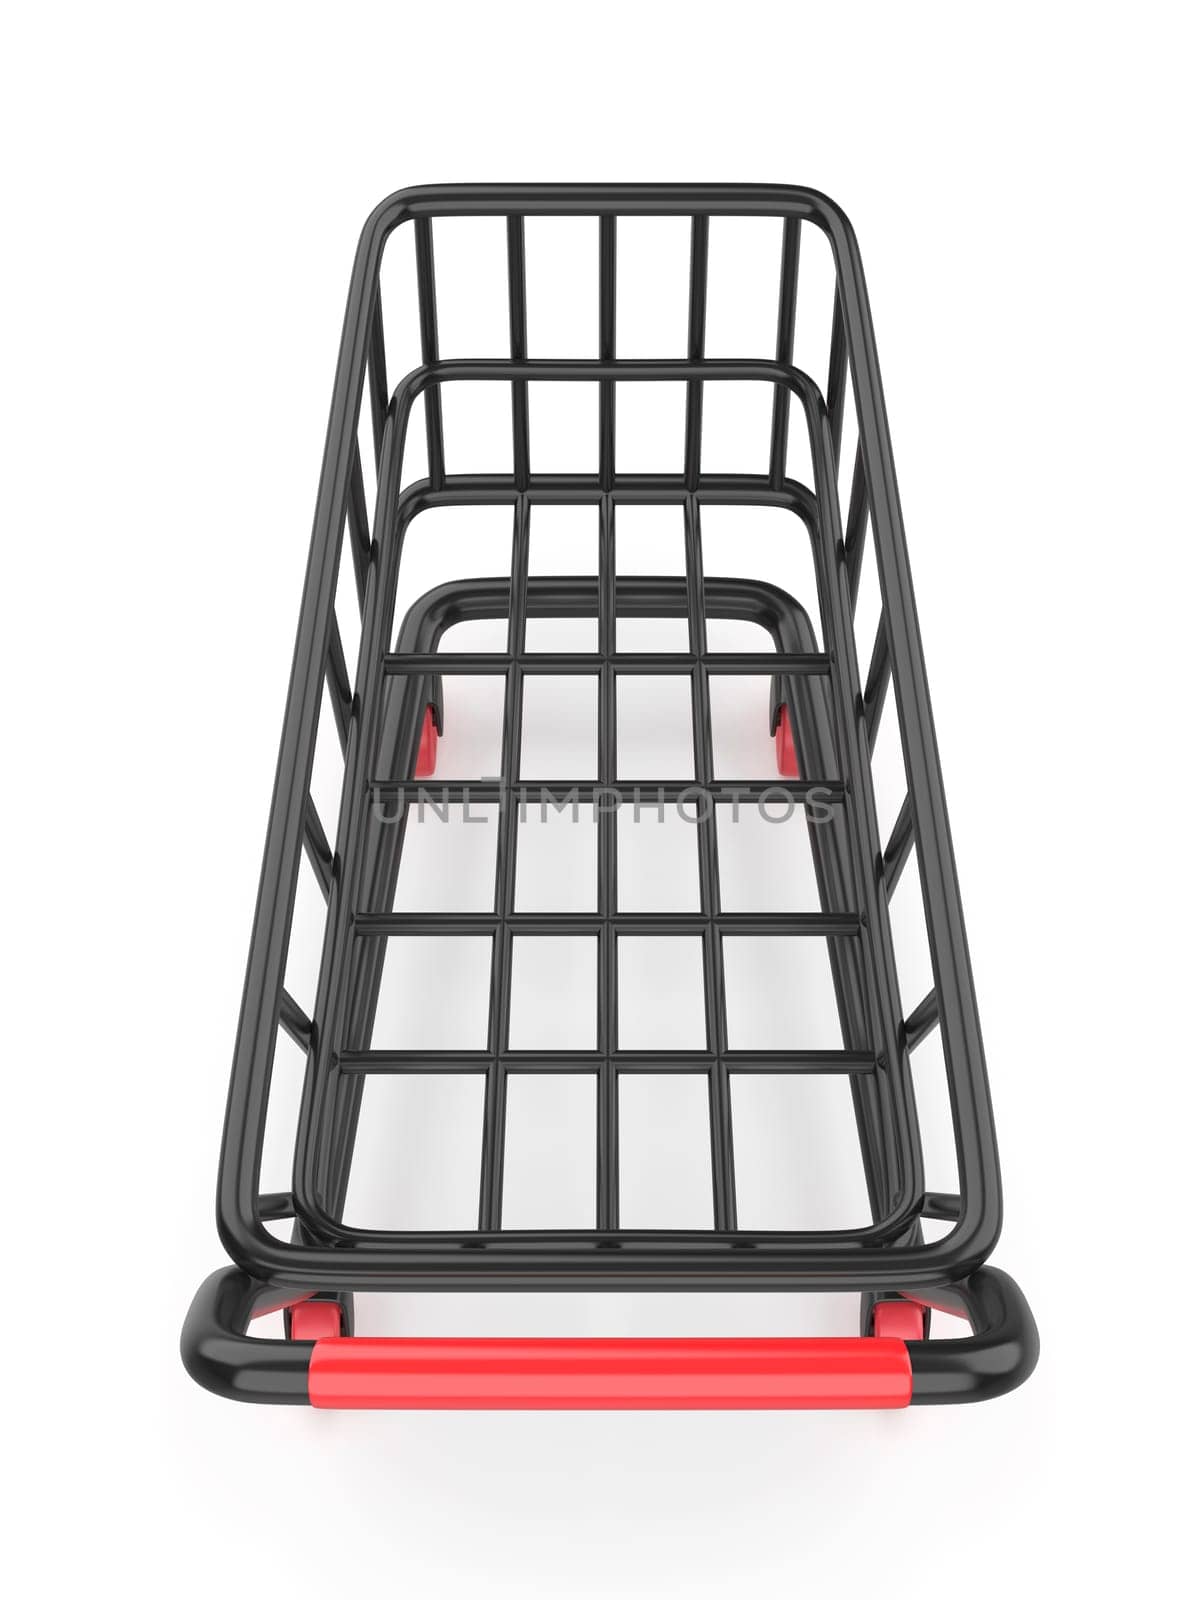 Black empty shopping cart by magraphics